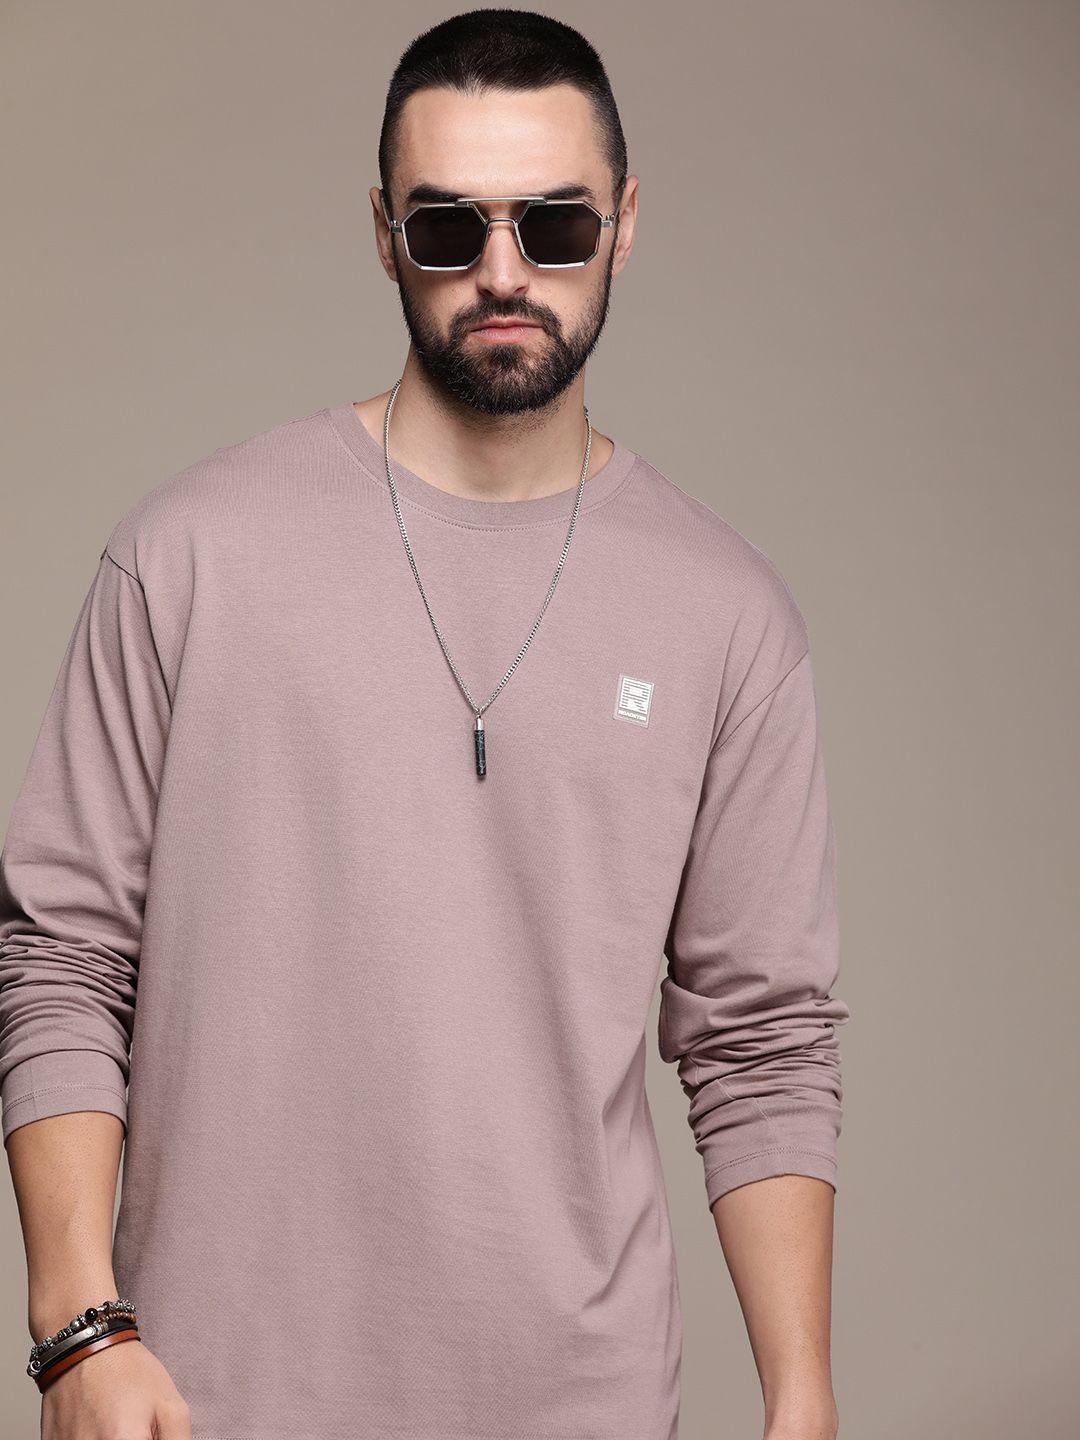 the roadster life co. pure cotton solid drop-shoulder sleeves casual t-shirt